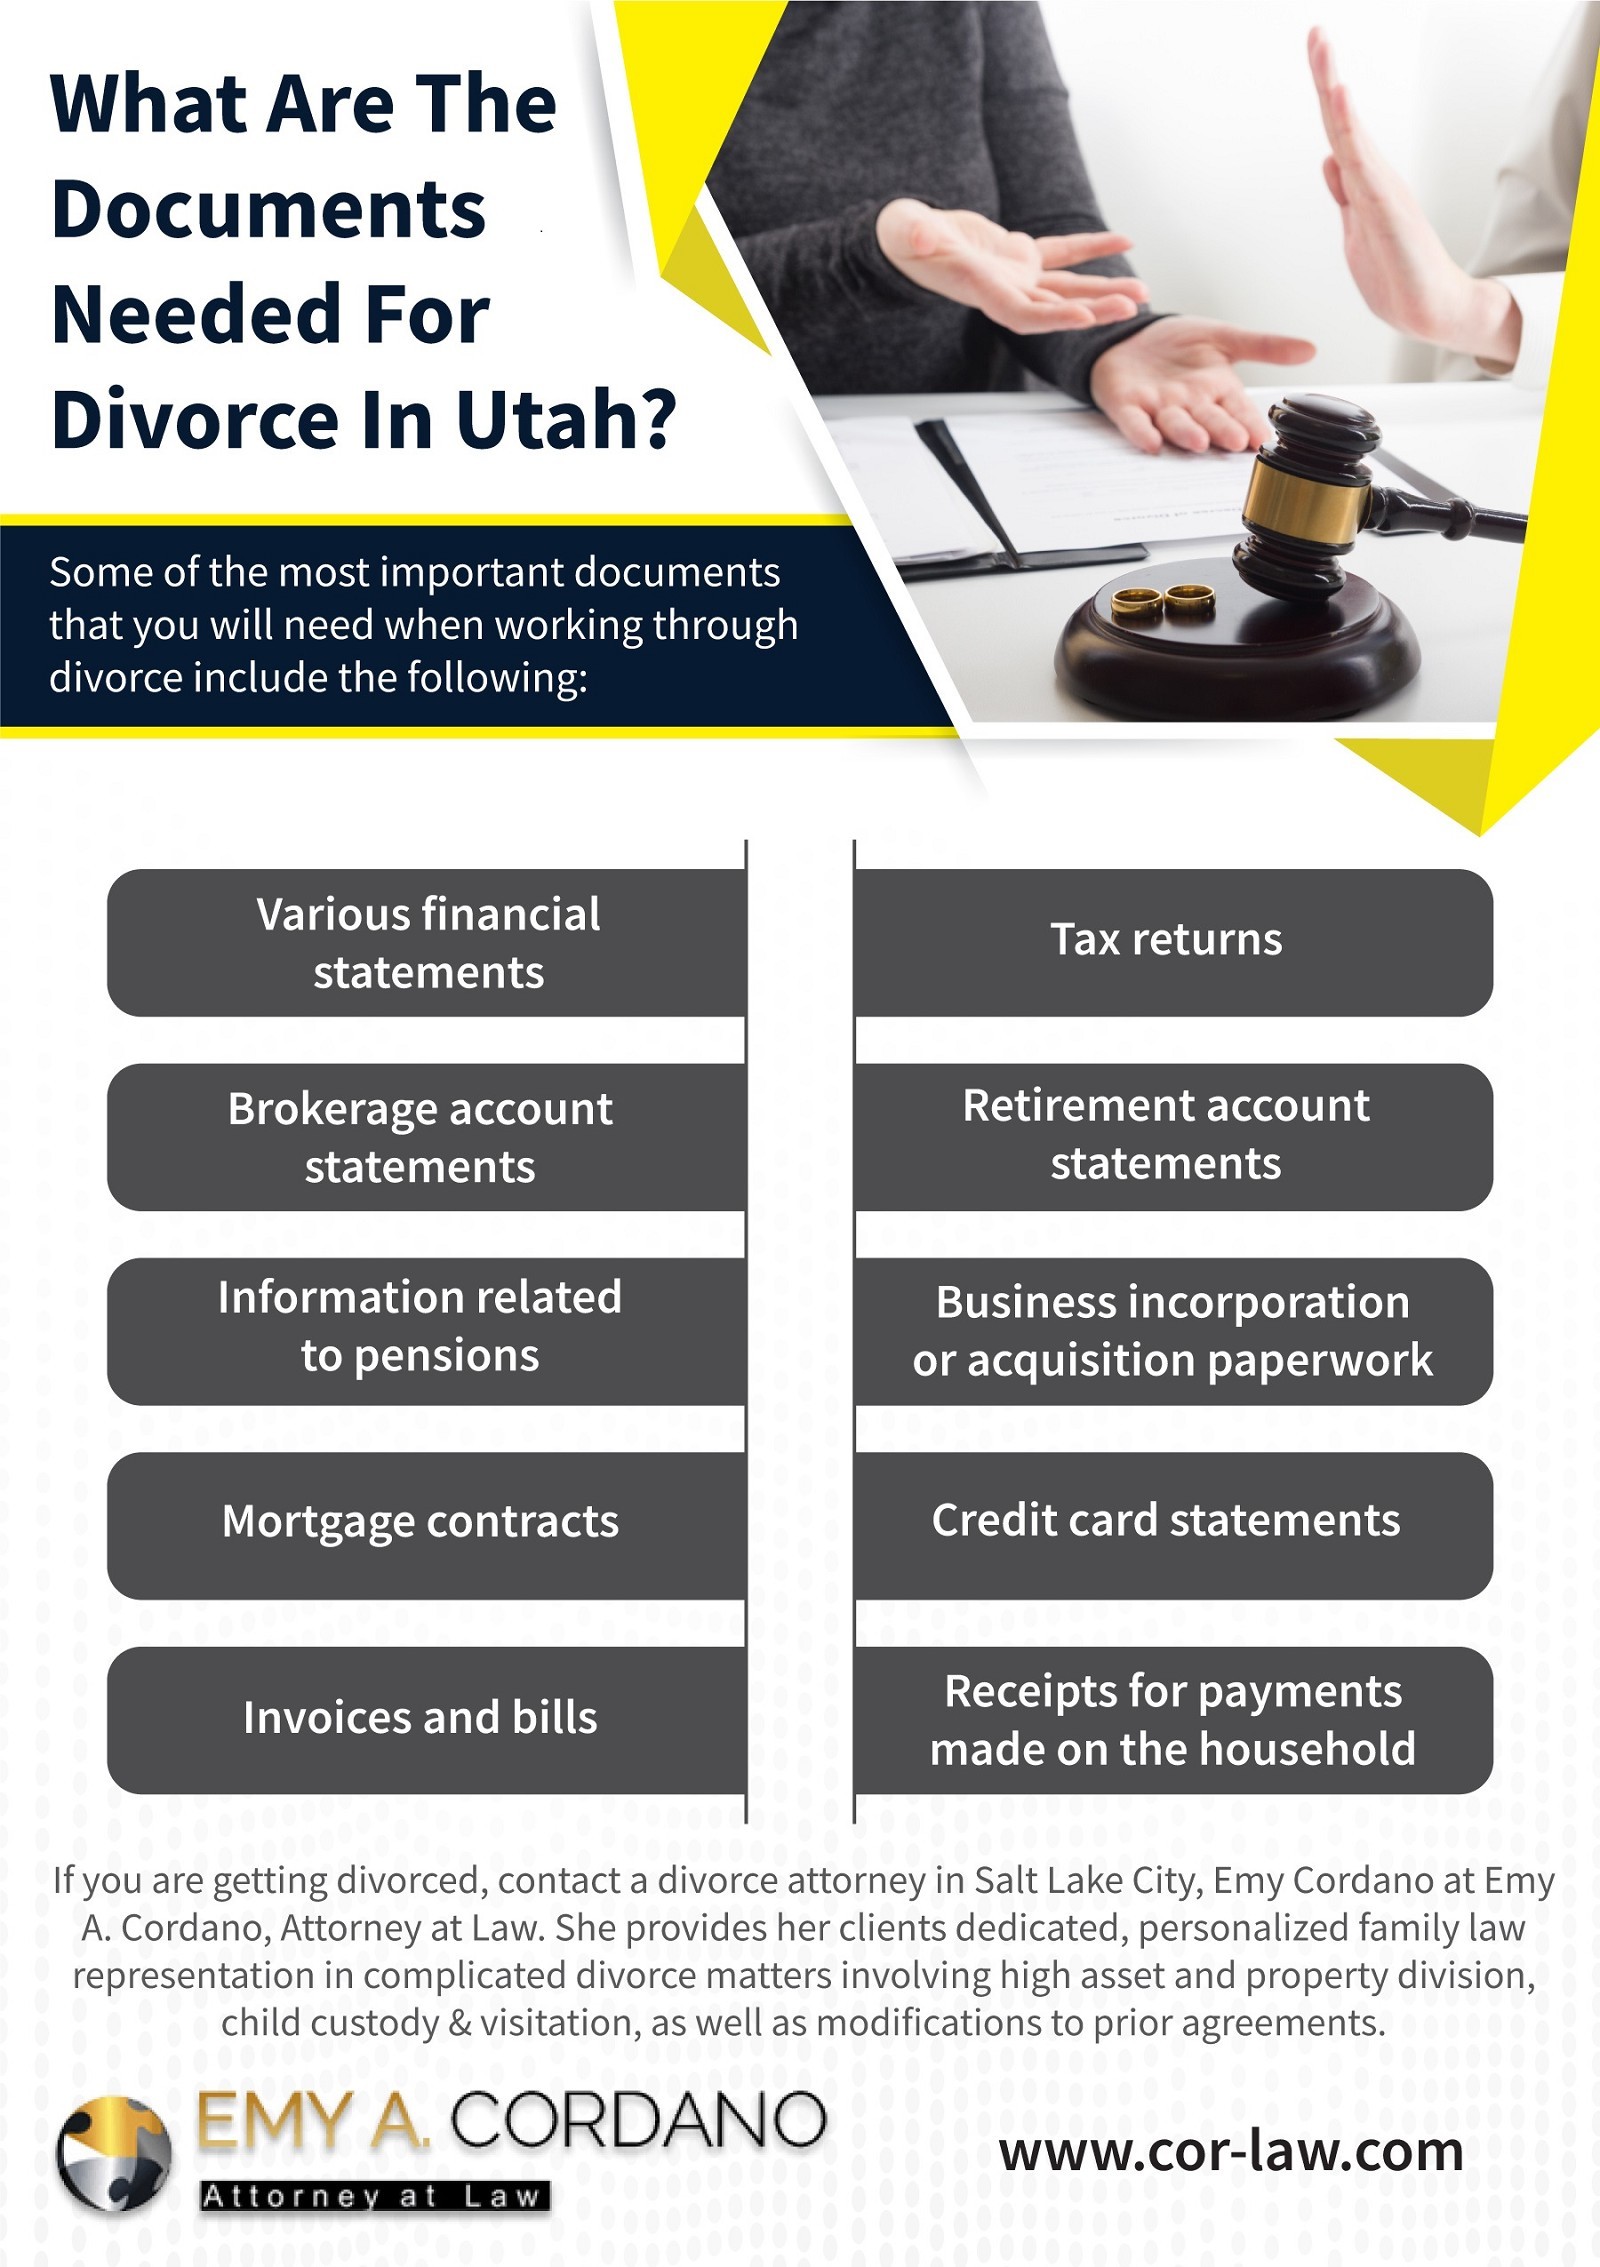 What Are The Documents Needed For Divorce In Utah?